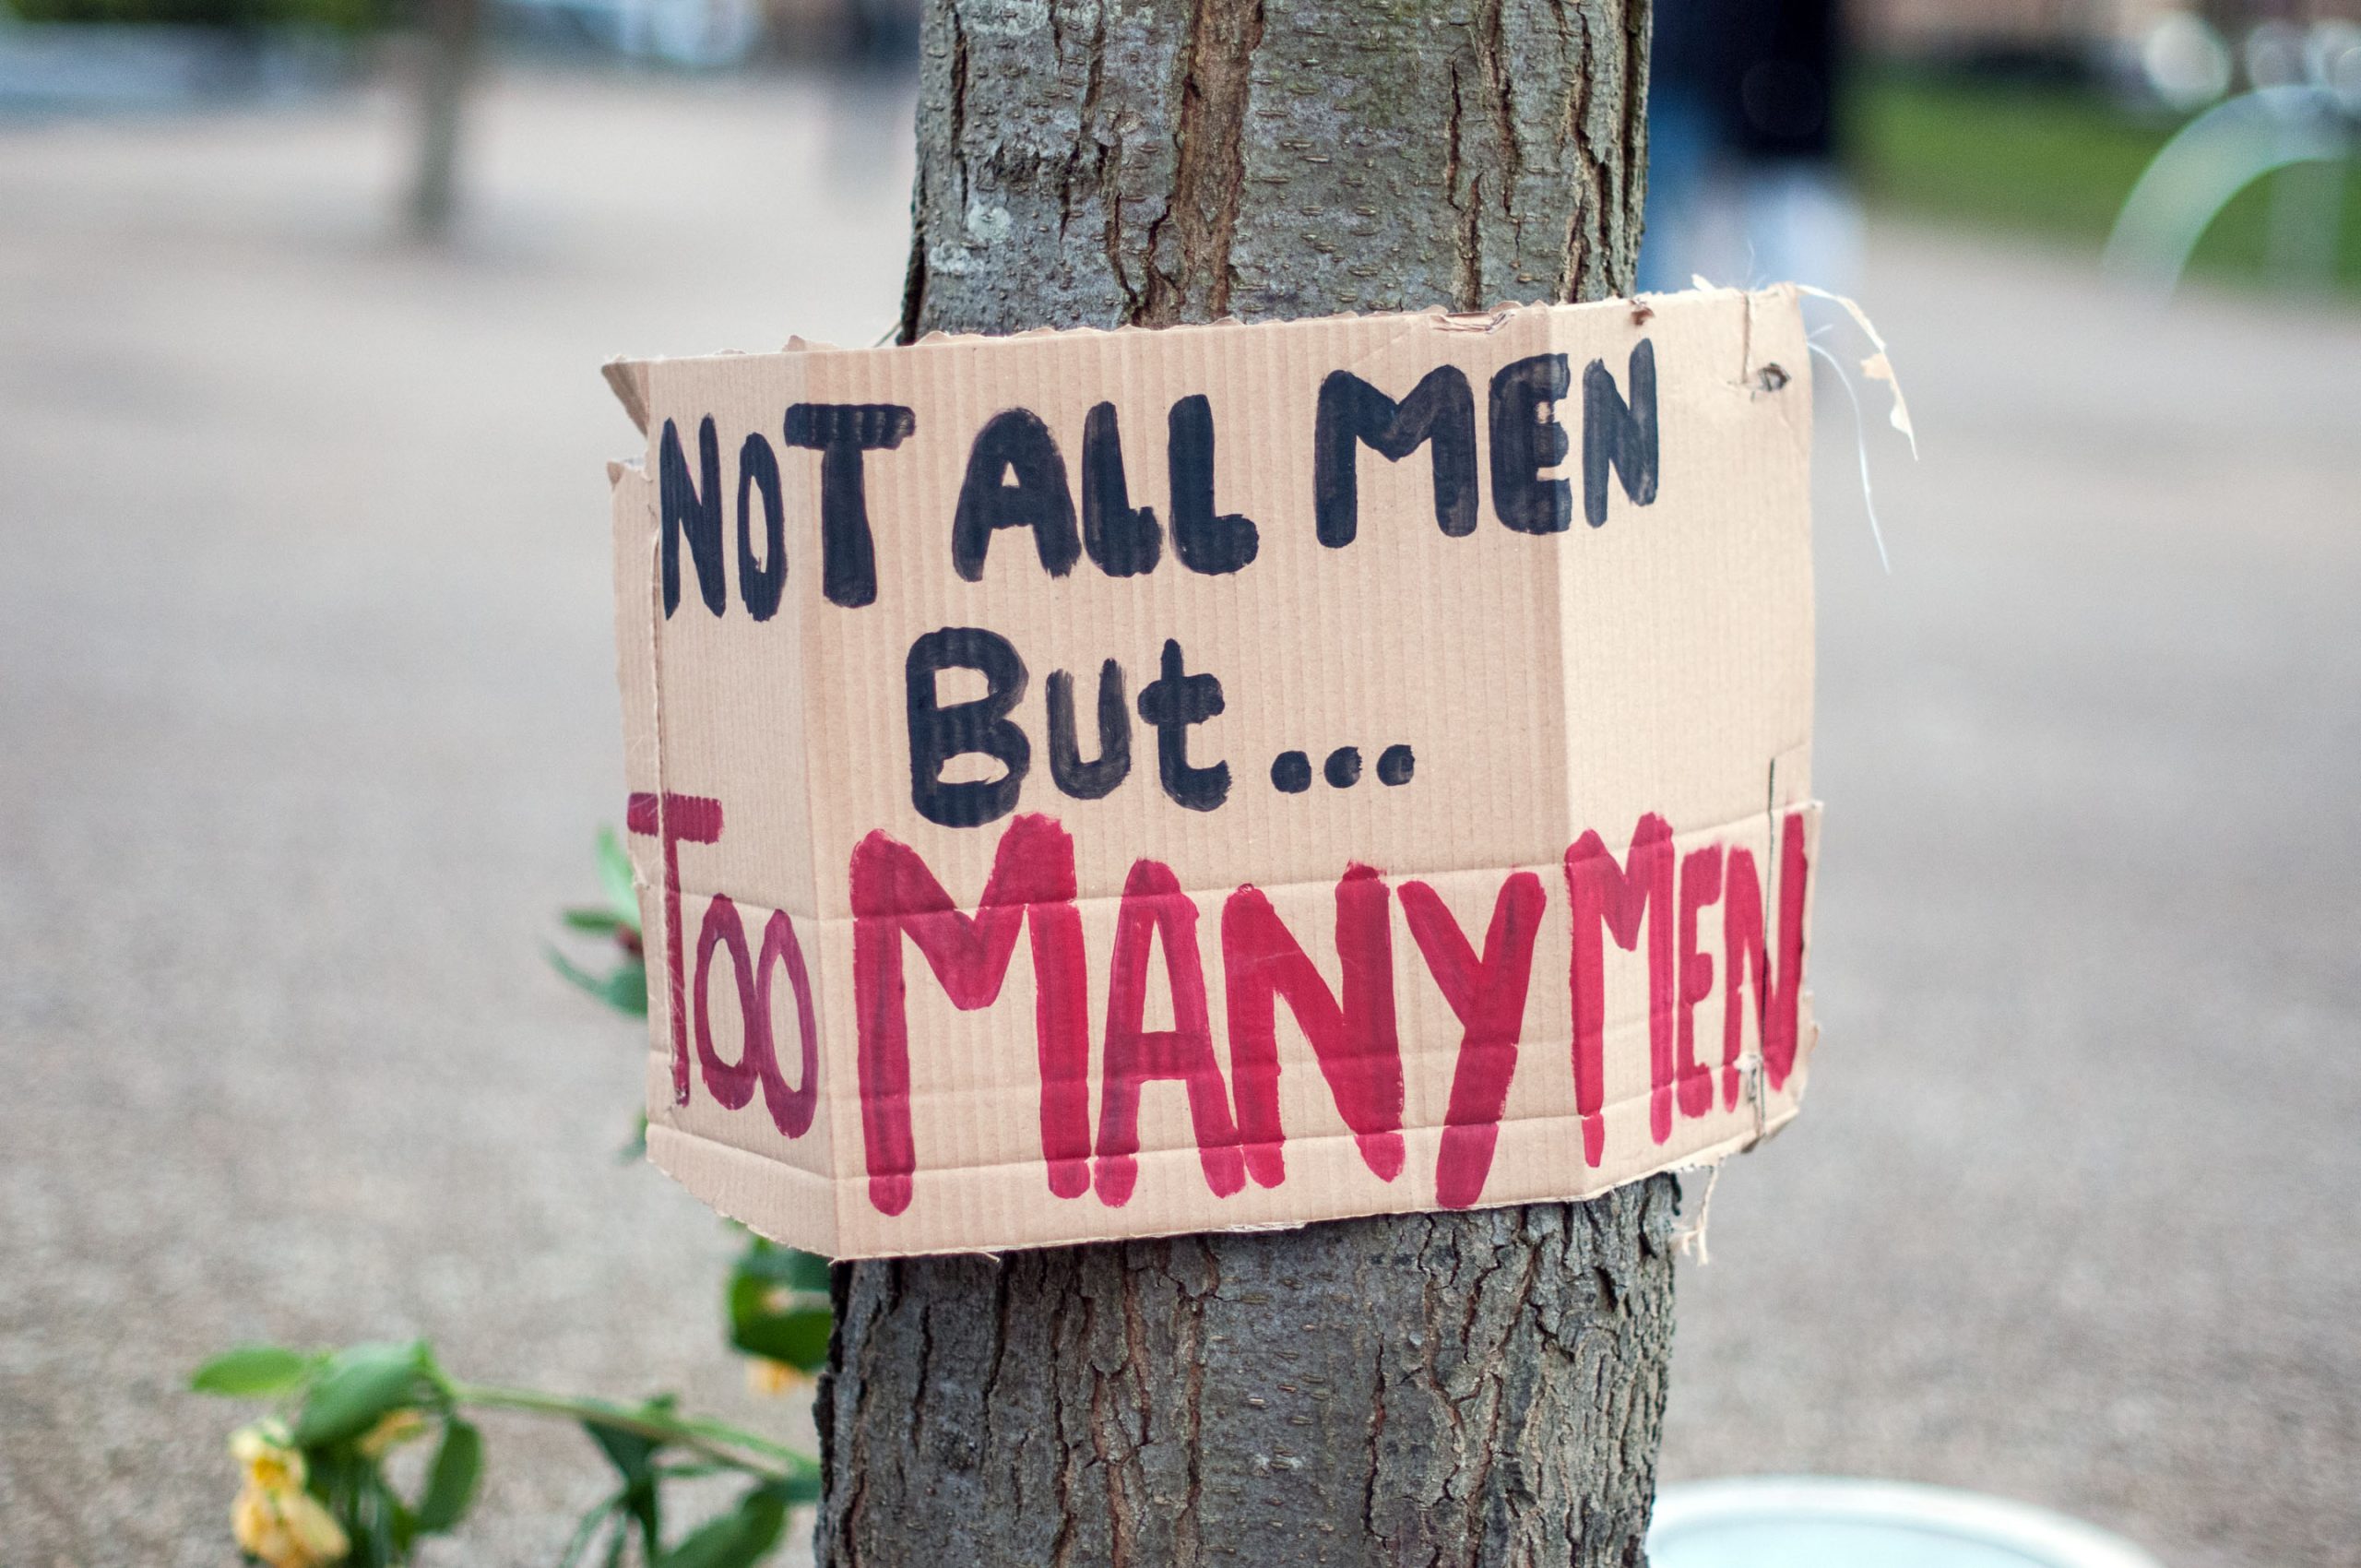 A sign on a tree reads: "Not all men but too many men".